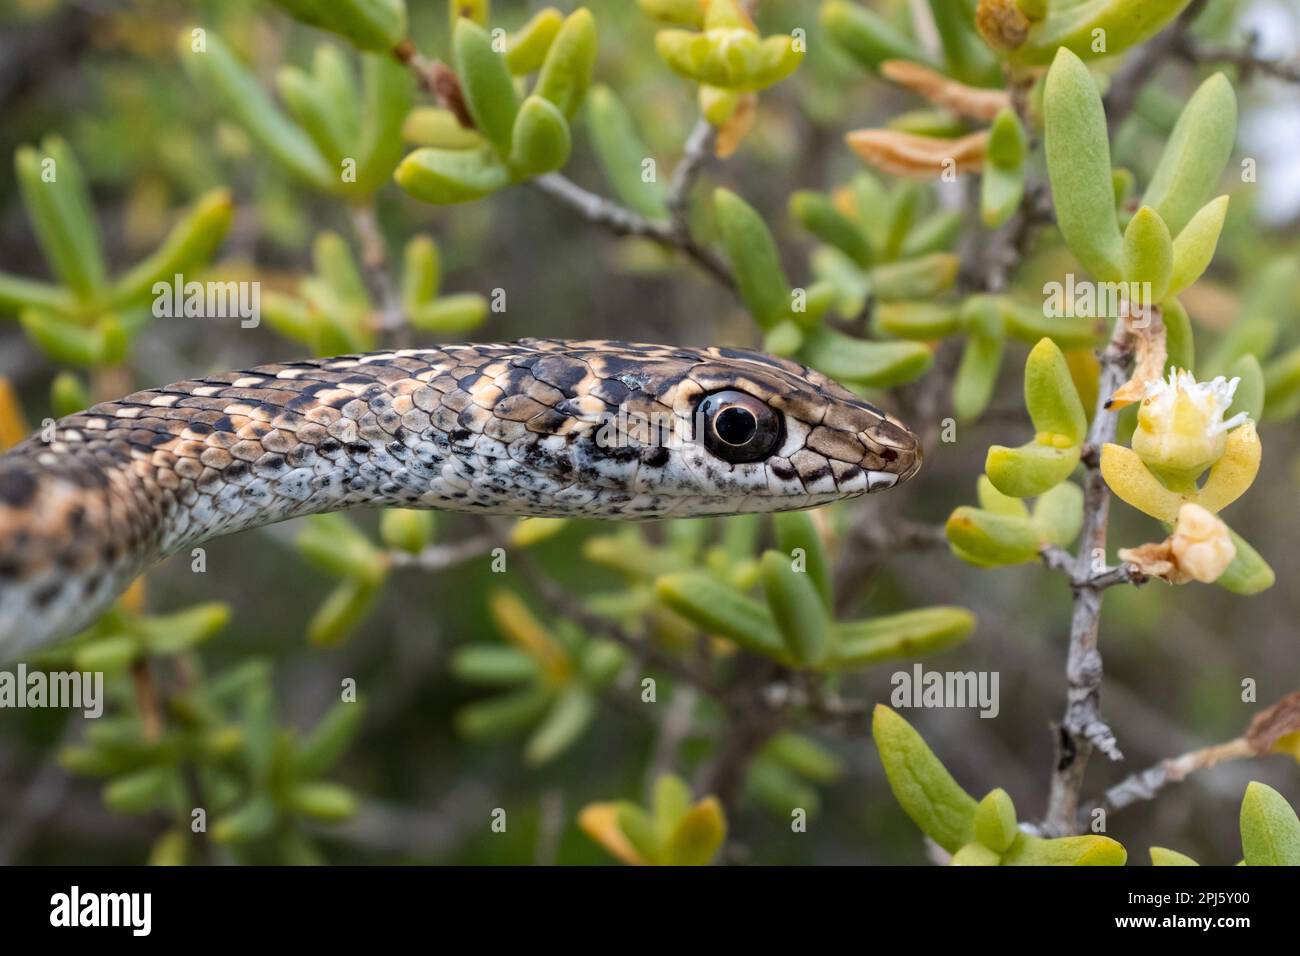 A macro shot of a brown patterned snake slithering through a shrubbery Stock Photo